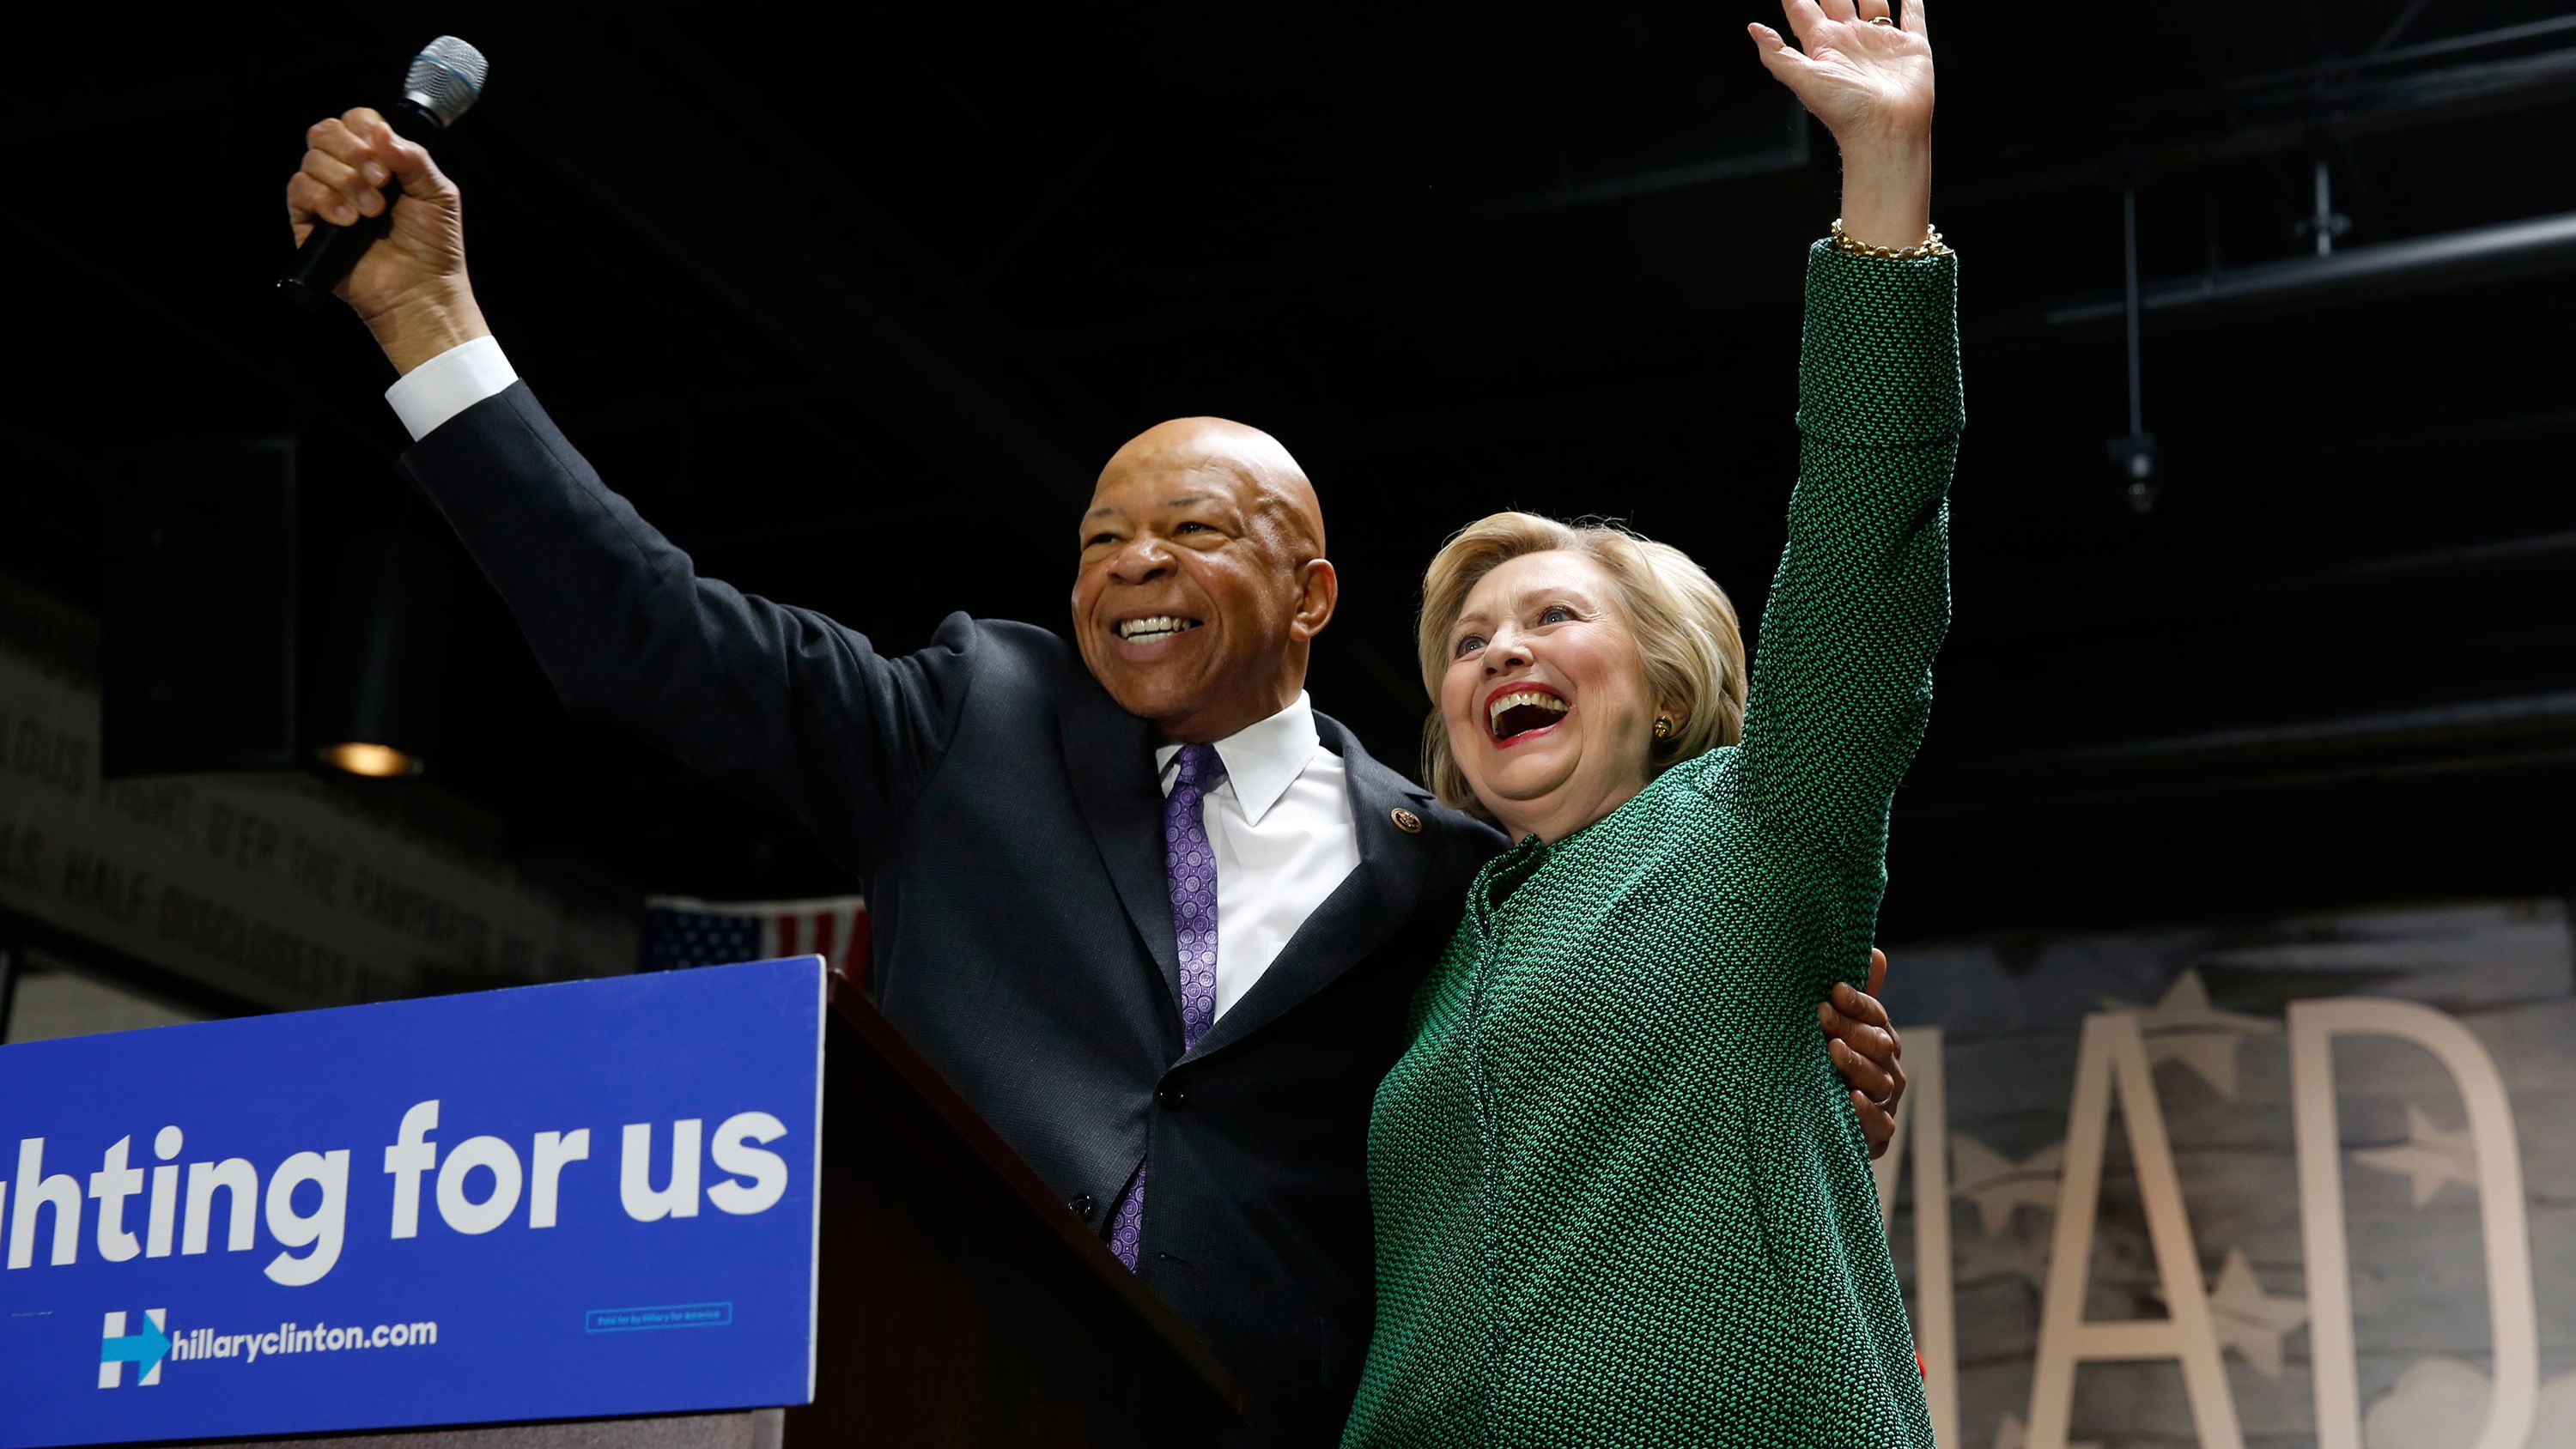 Cummings stands with Democratic presidential candidate Hillary Clinton after endorsing her at an event in Baltimore in April 2016.